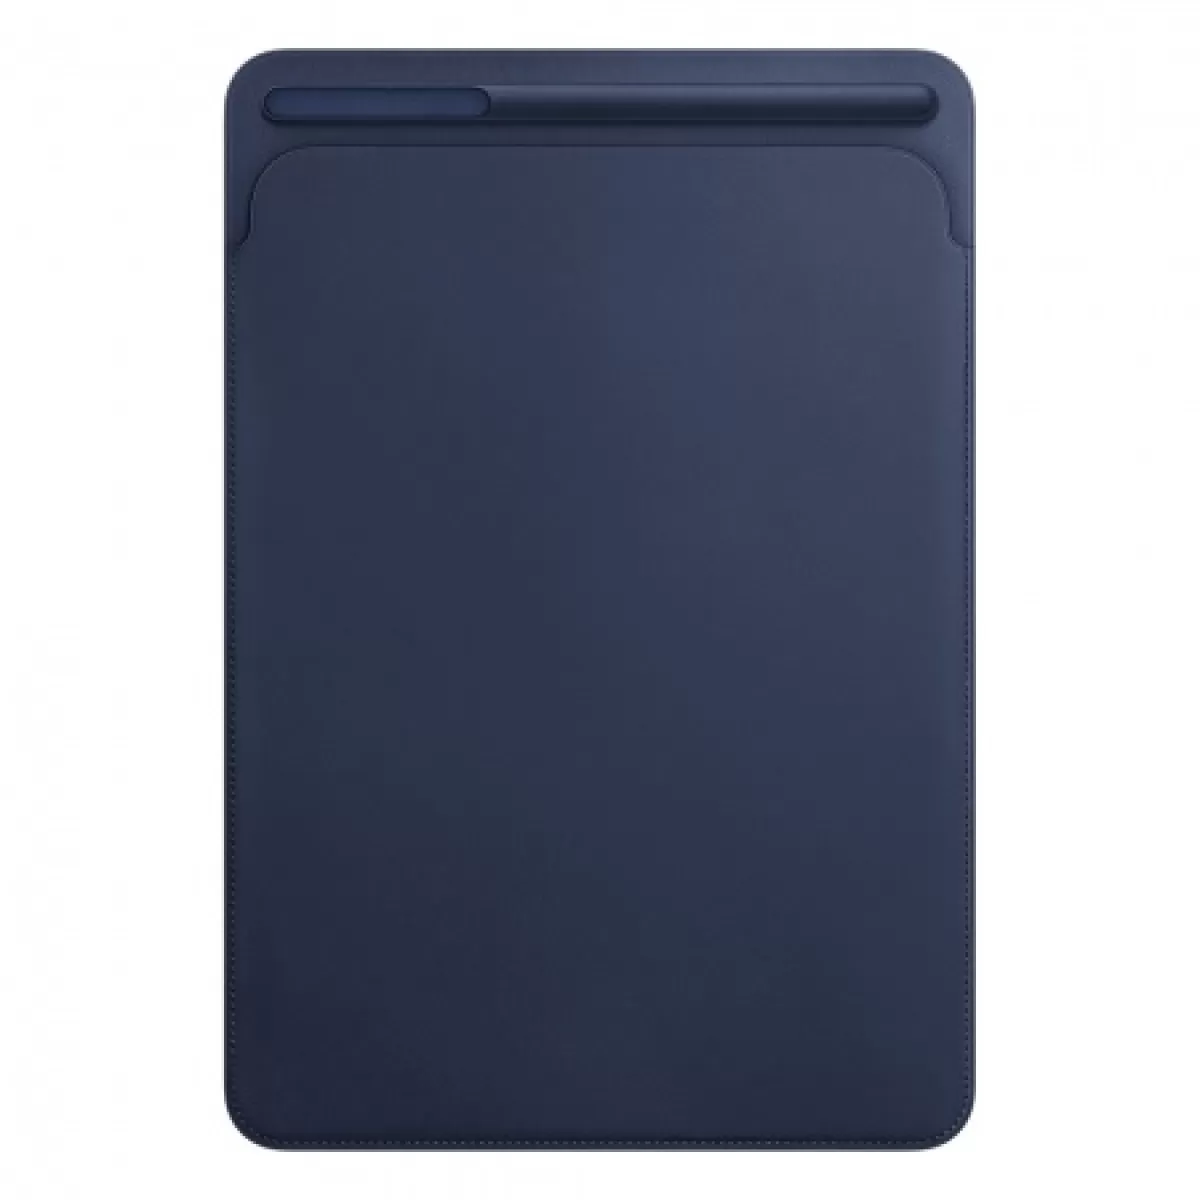 Apple Leather Sleeve for 10.5inch iPad Pro Midnight Blue